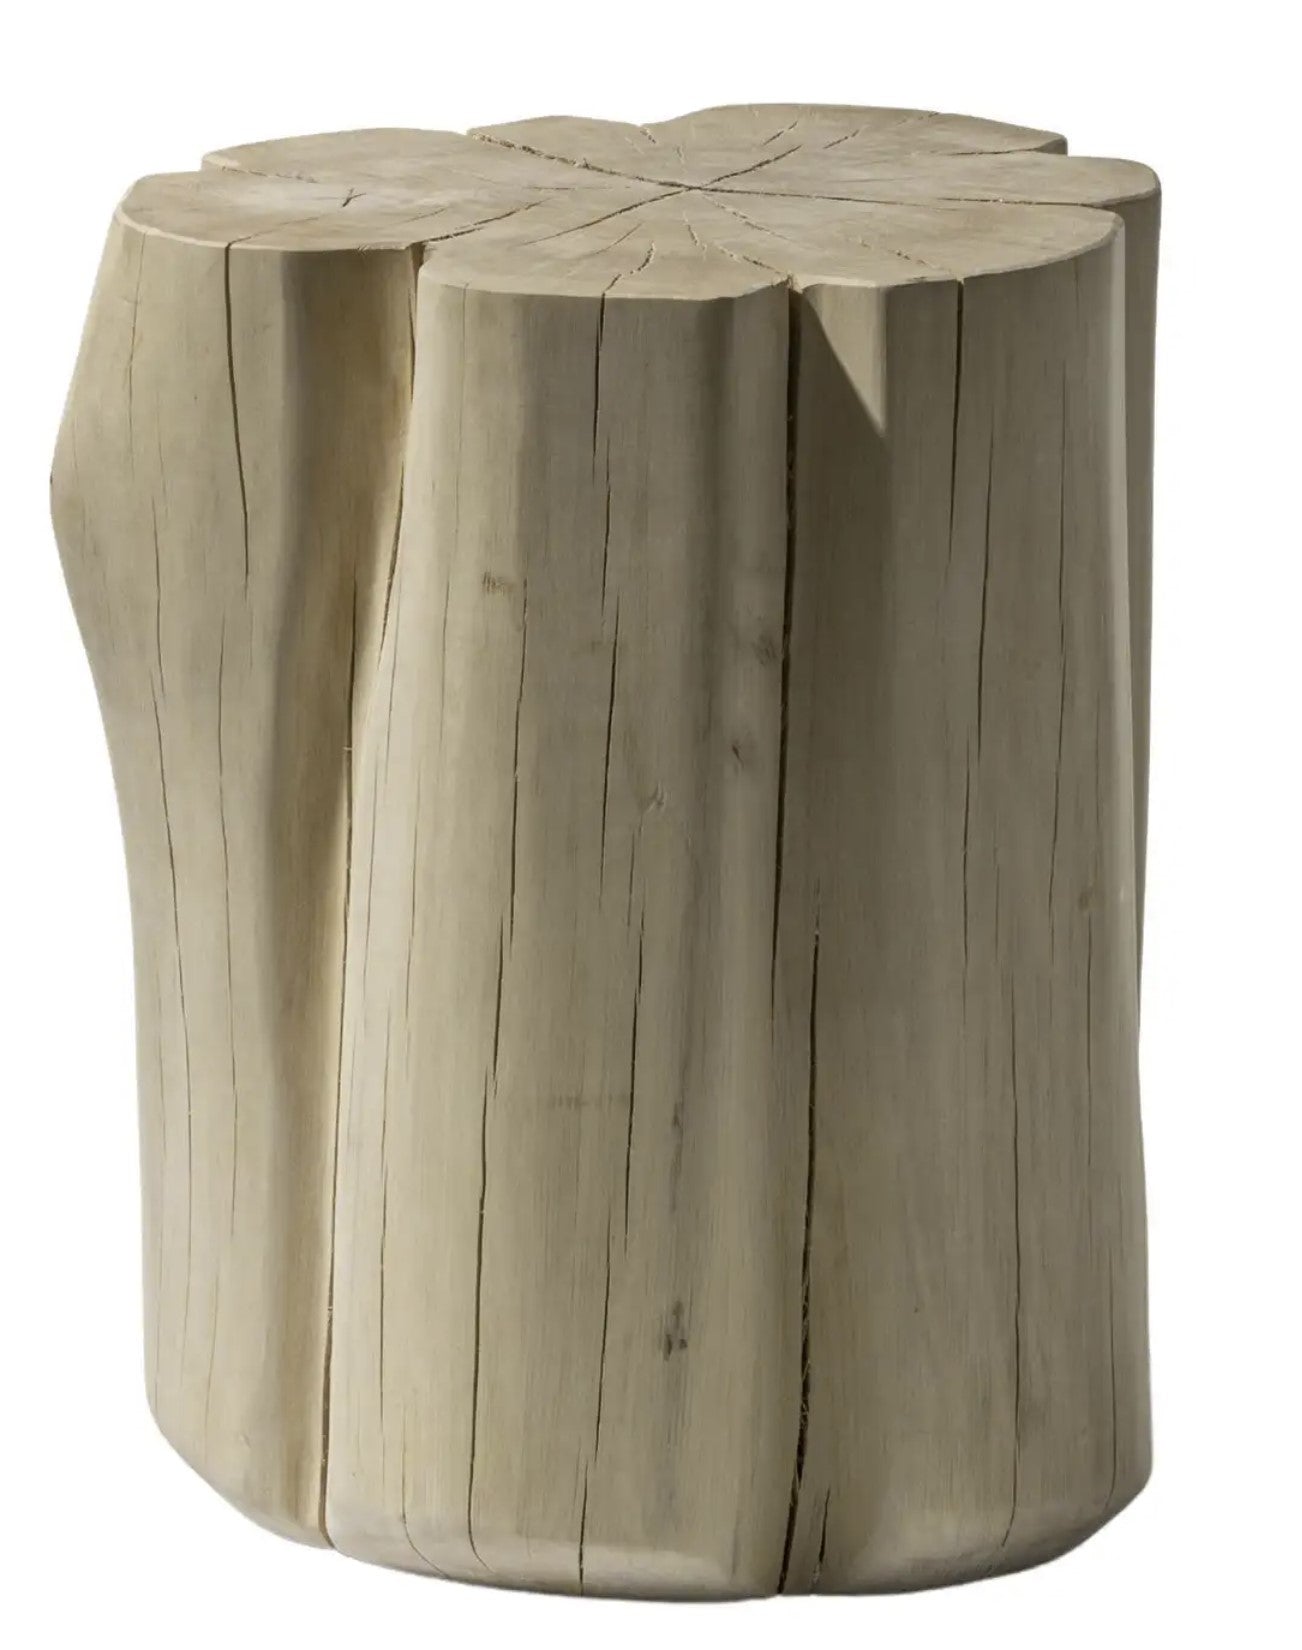 Small Brick Side Table in Natural Barked Hornbeam Trunk - $565.00